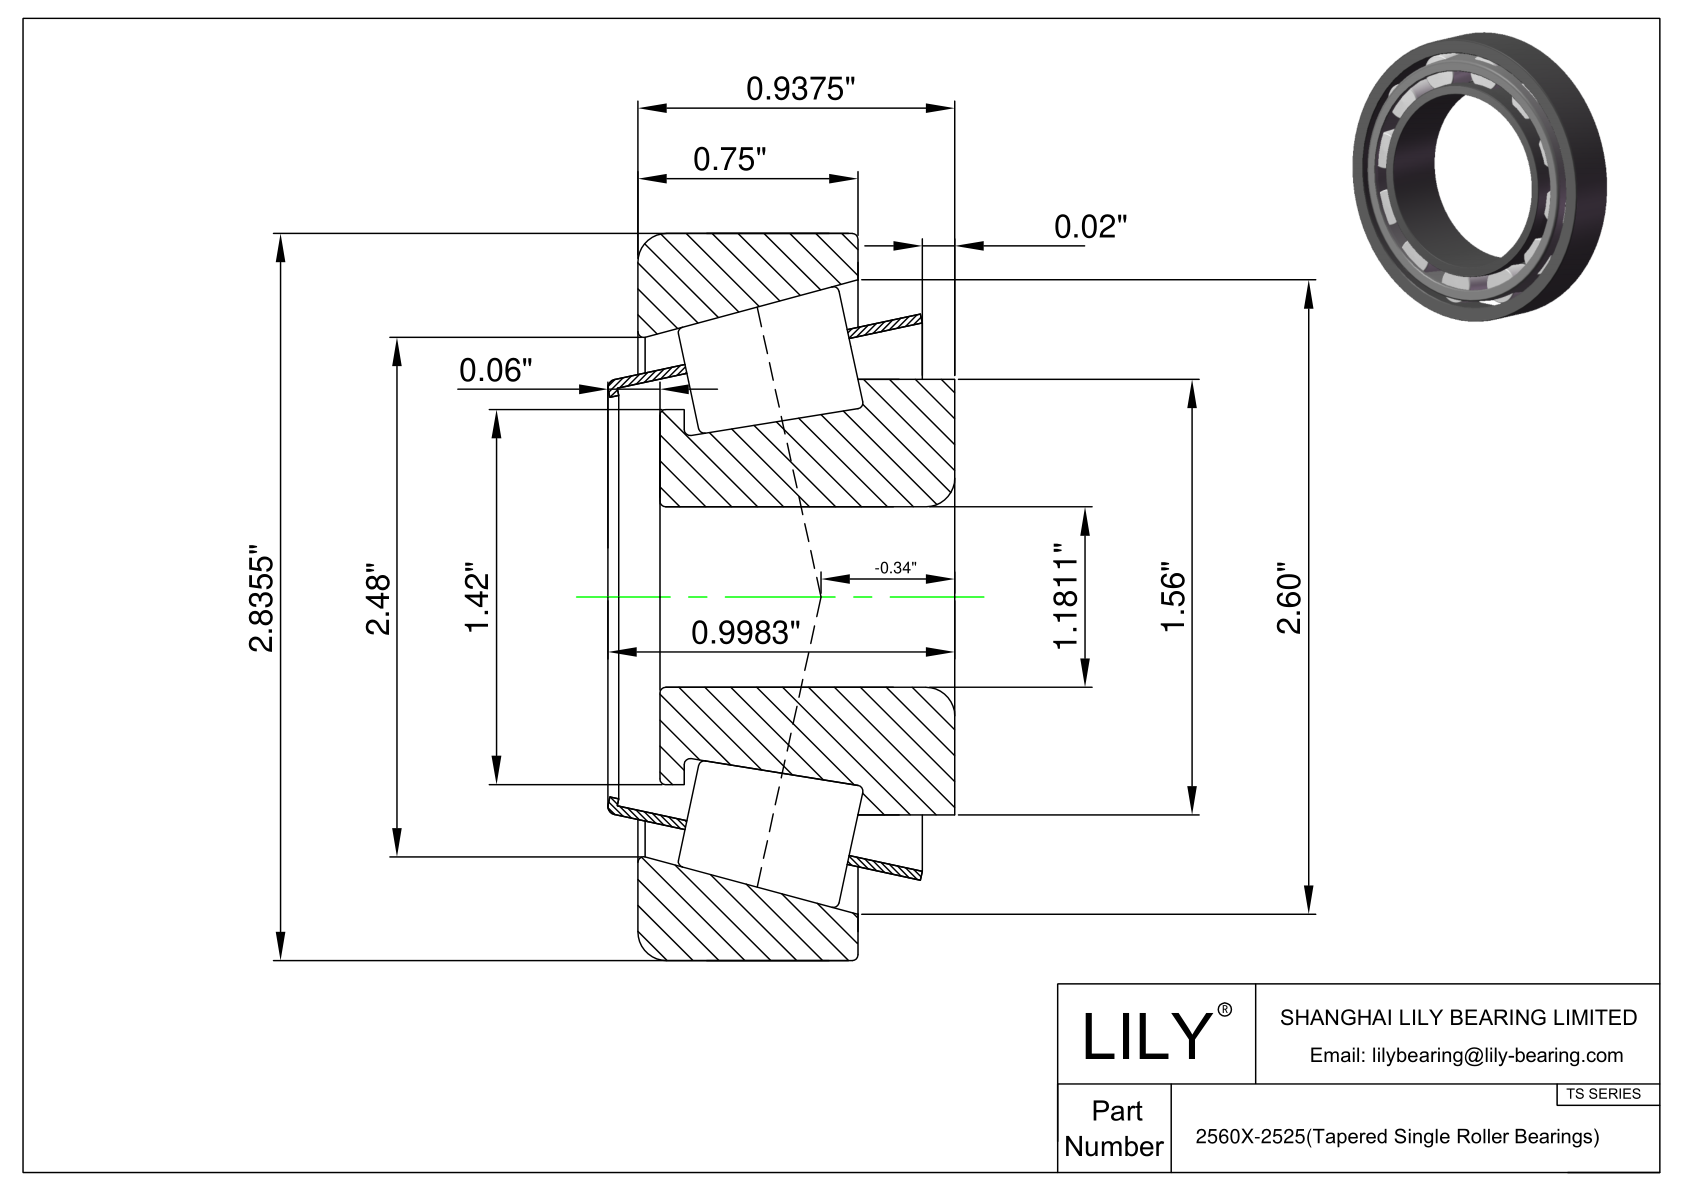 2560X-2525 TS (Tapered Single Roller Bearings) (Imperial) cad drawing